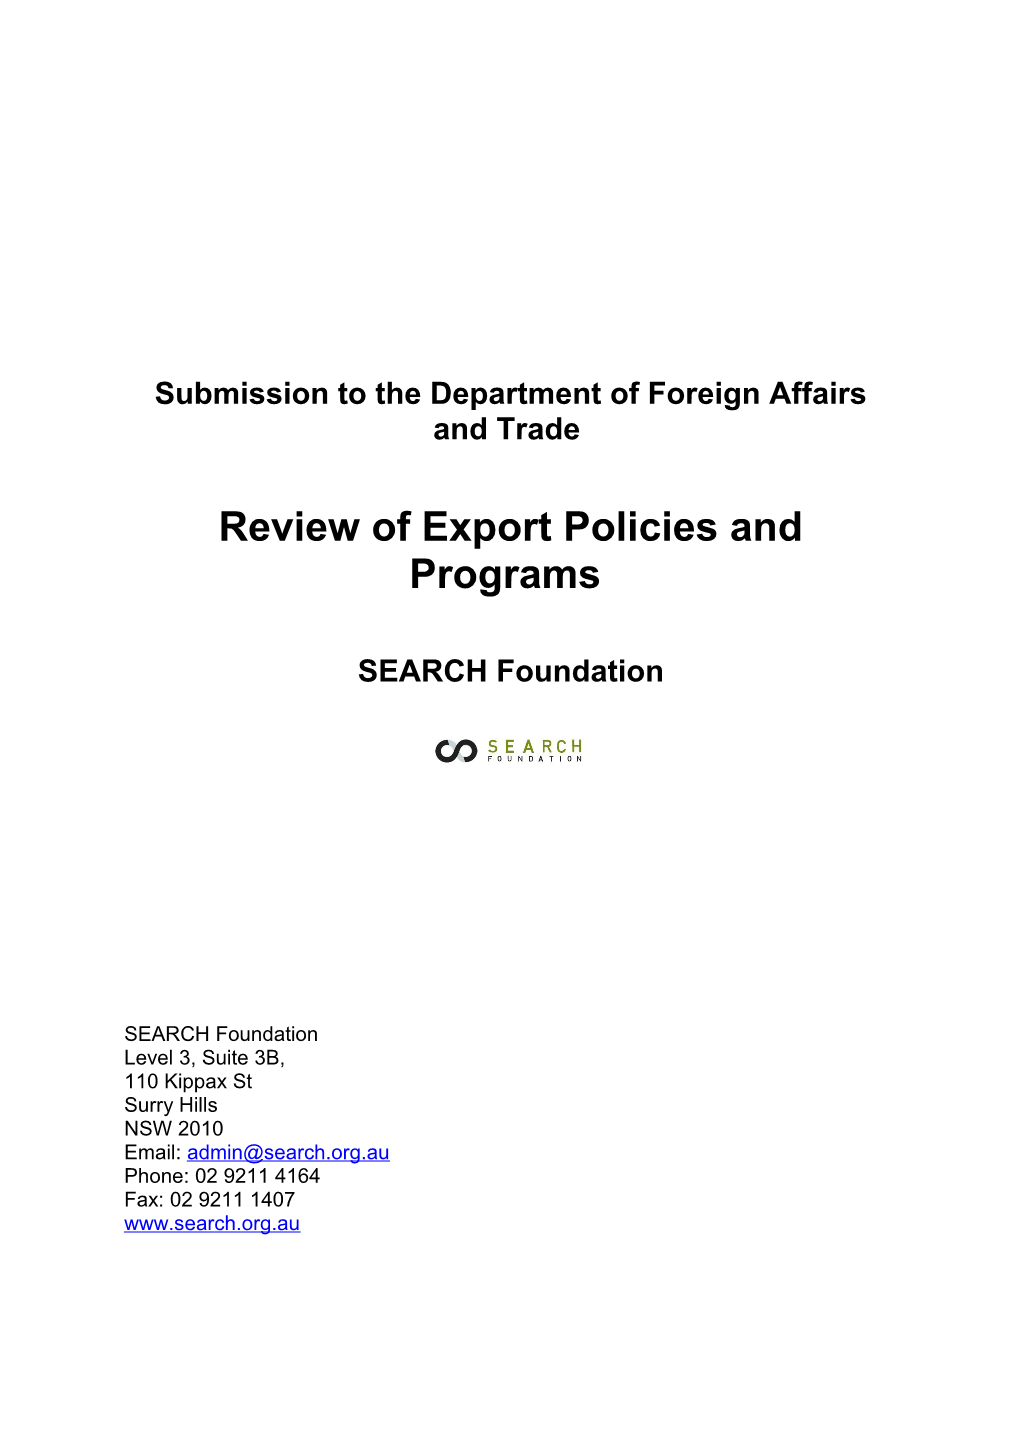 Submission to the Department of Foreign Affairs and Trade